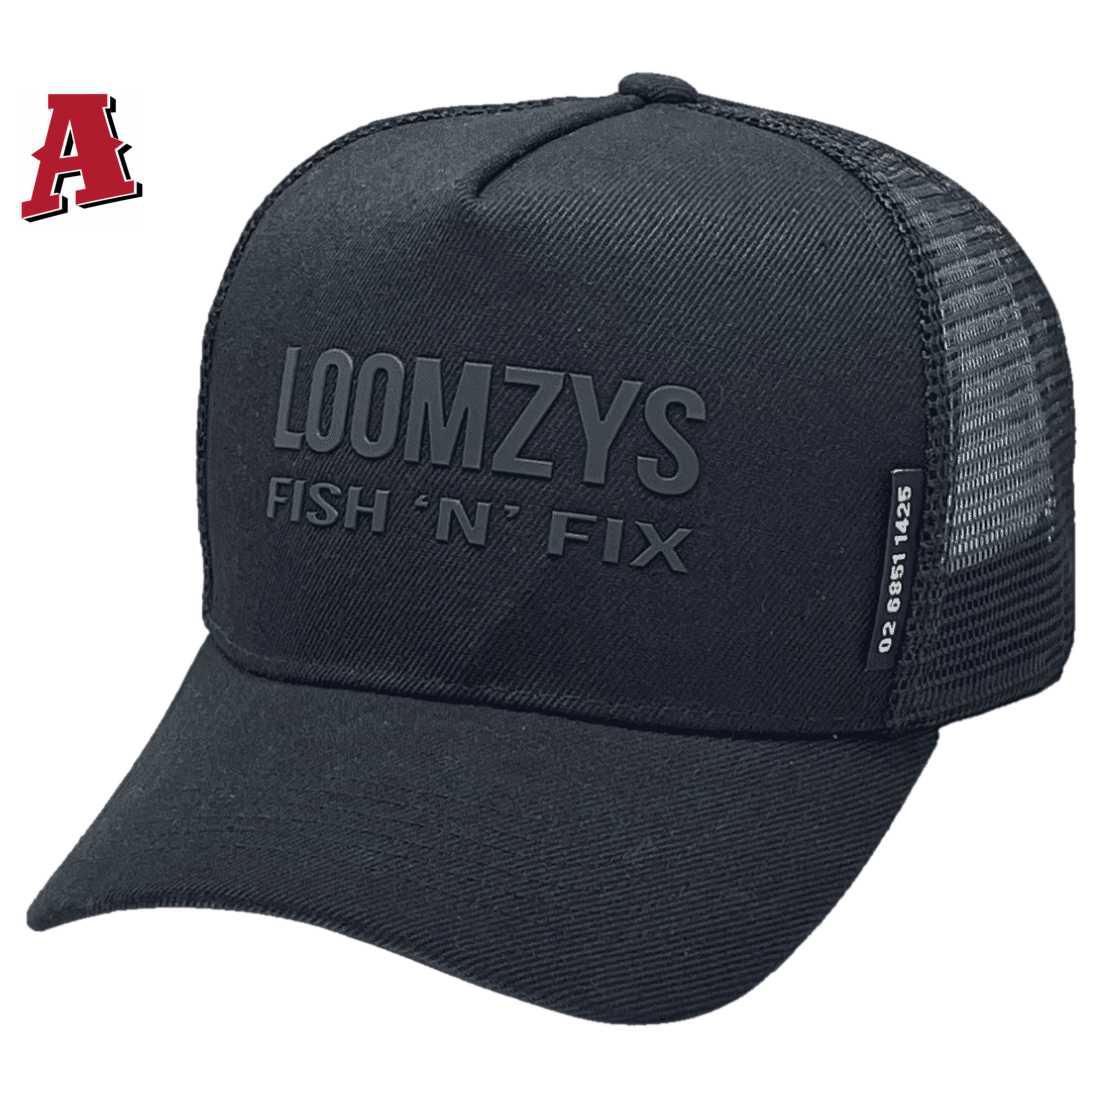 Loomzys Fish N Fix Forbes NSW HP Basic Aussie Trucker Hats with Australian Head Crown and 3D Plastiweld Logo